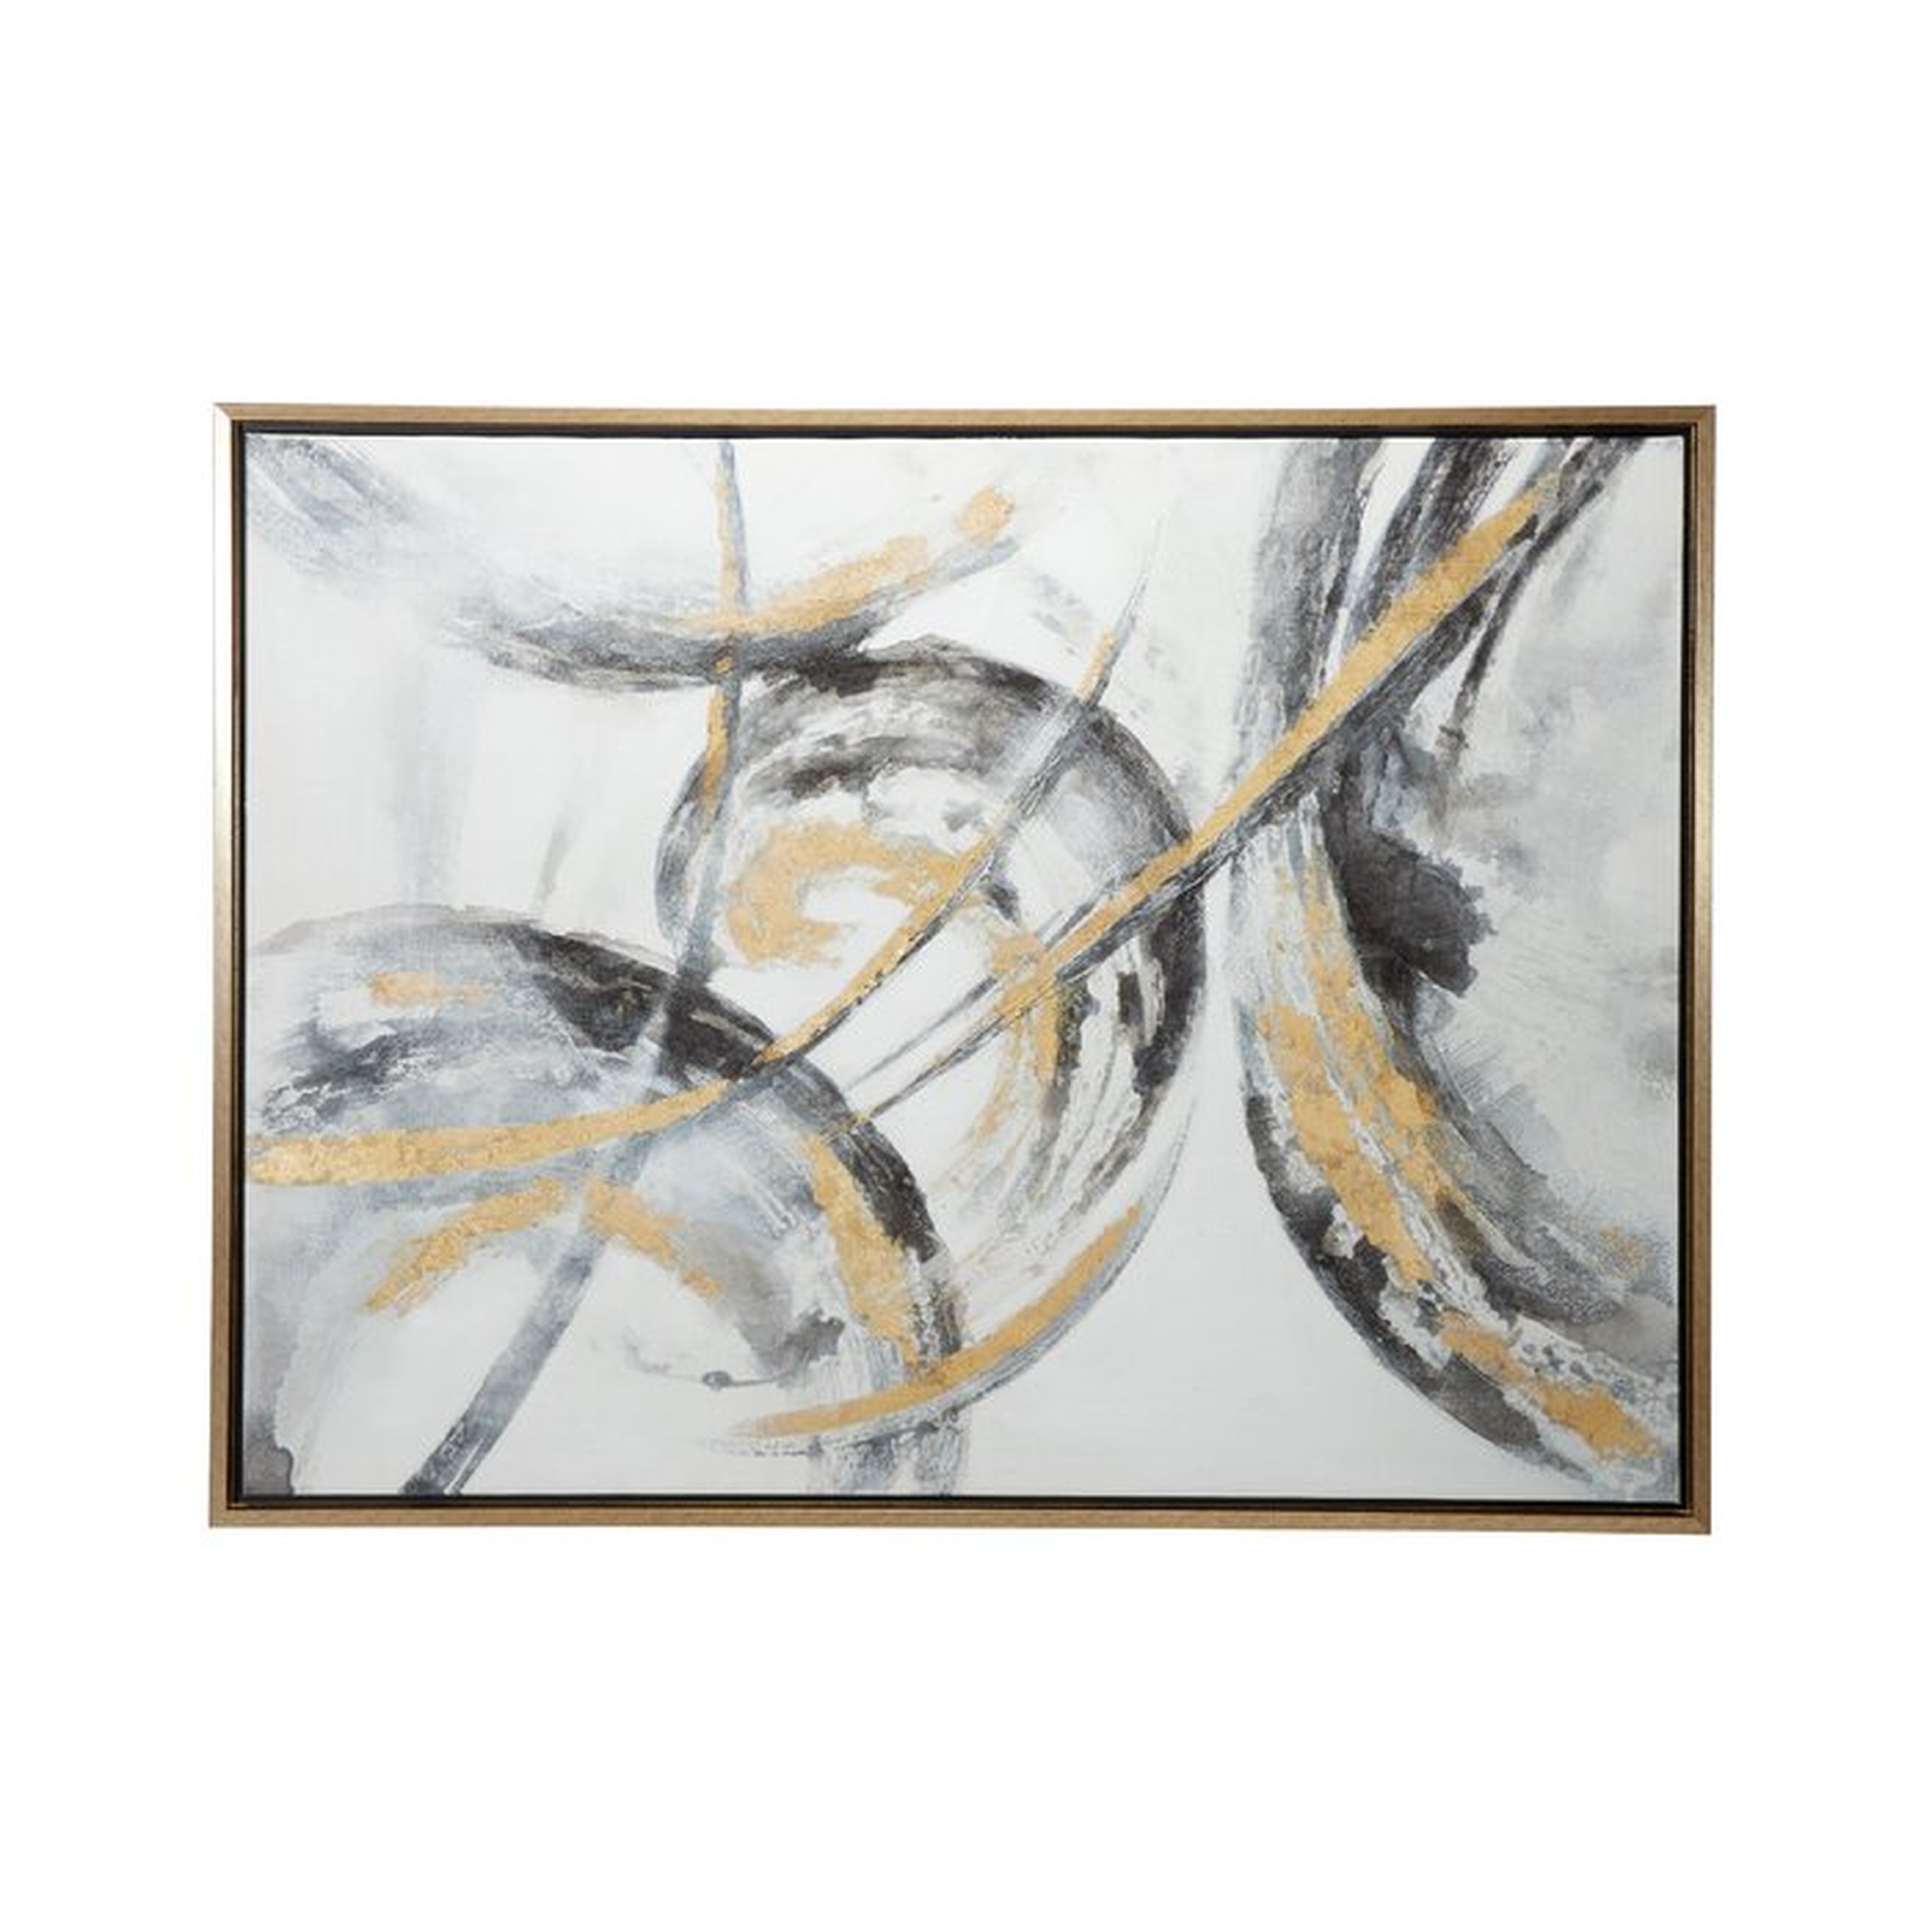 'Abstract' - Picture Frame Painting Print on Canvas - Wayfair